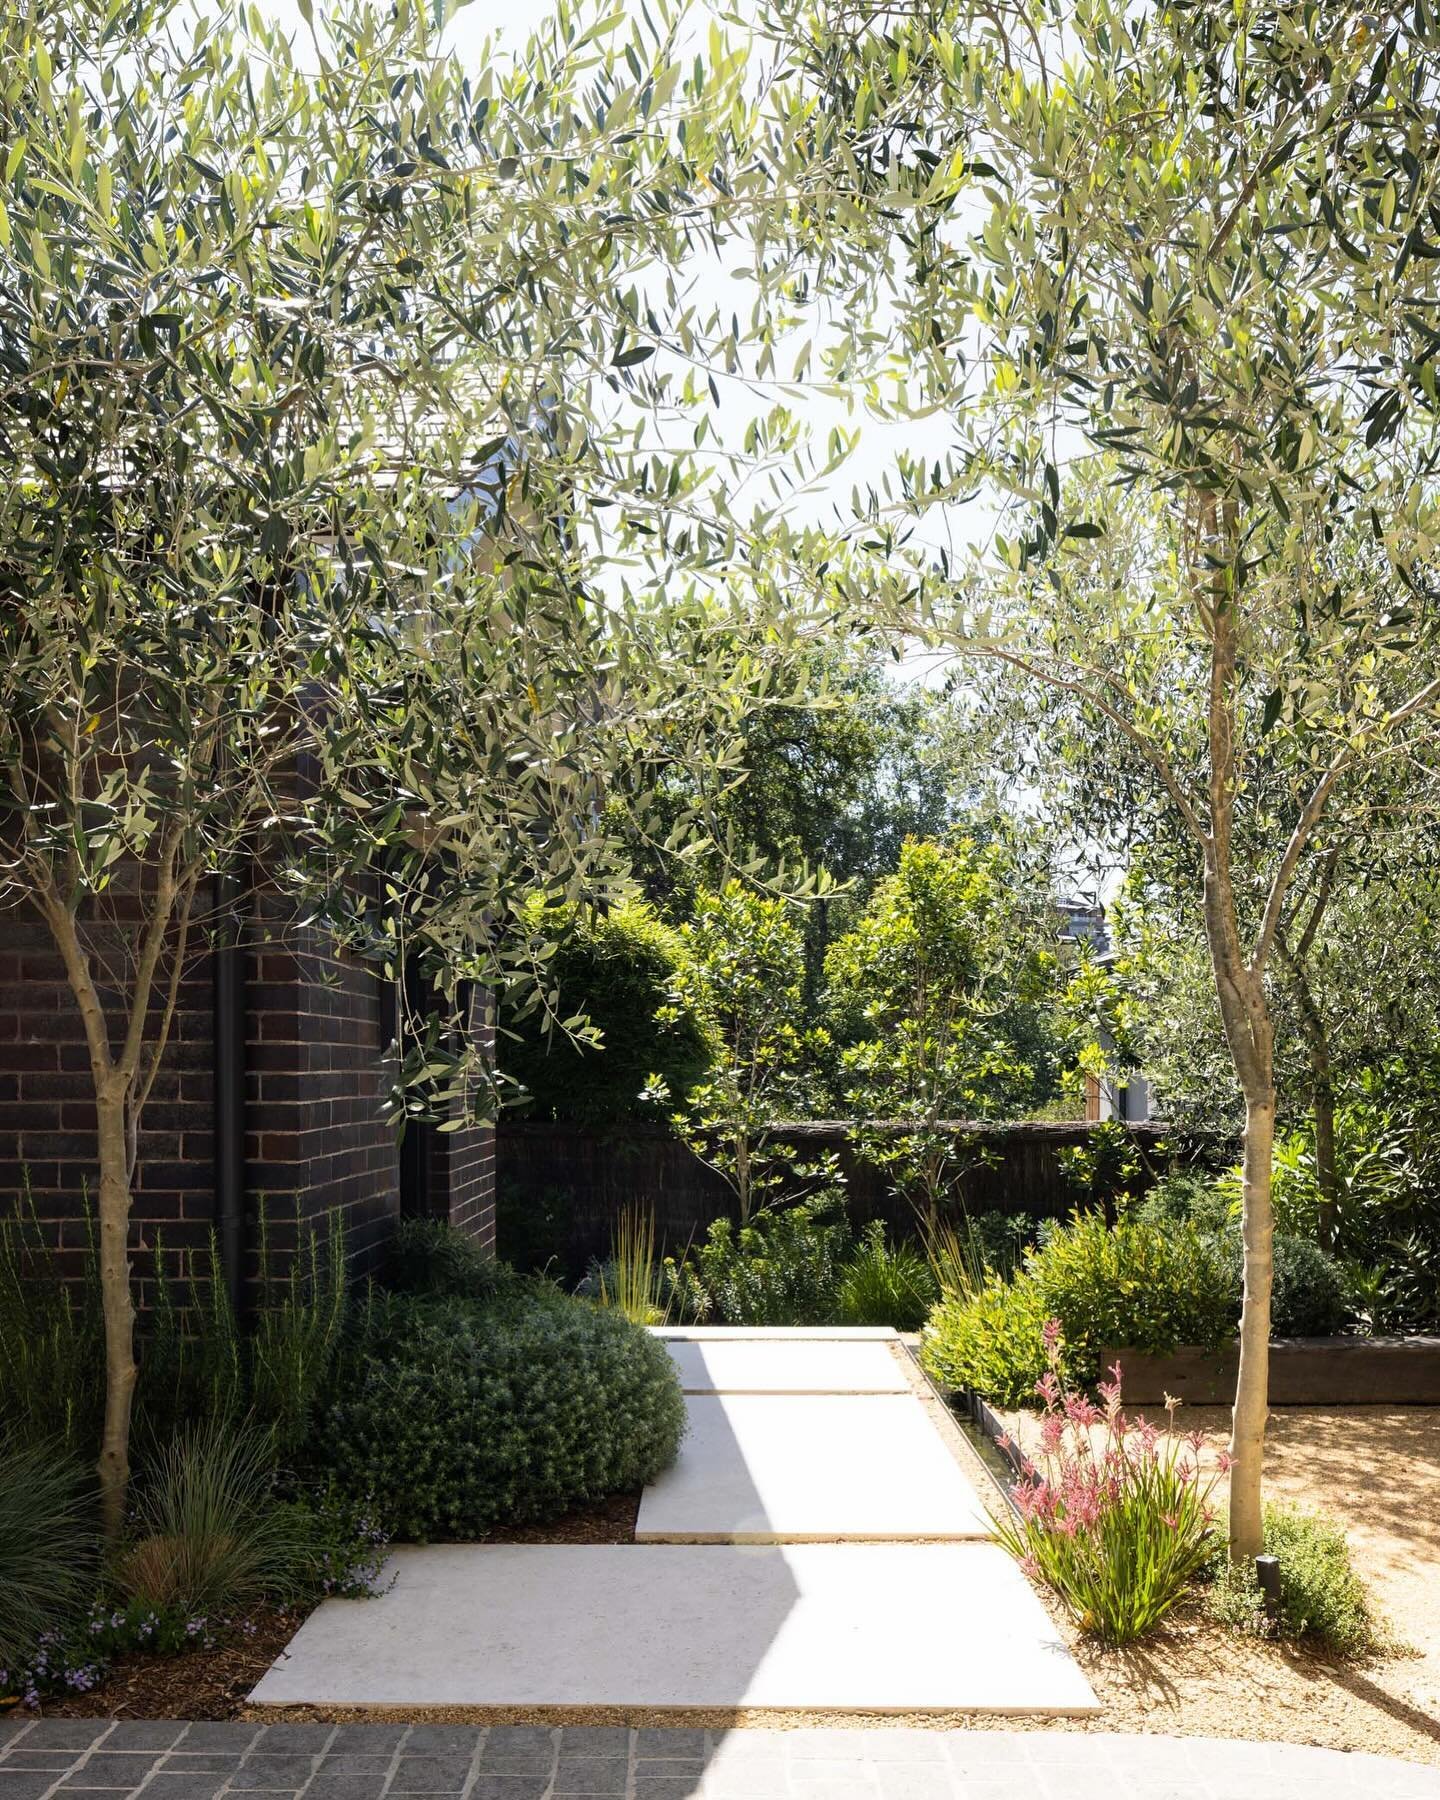 Olive trees creating an informal archway over garden path.